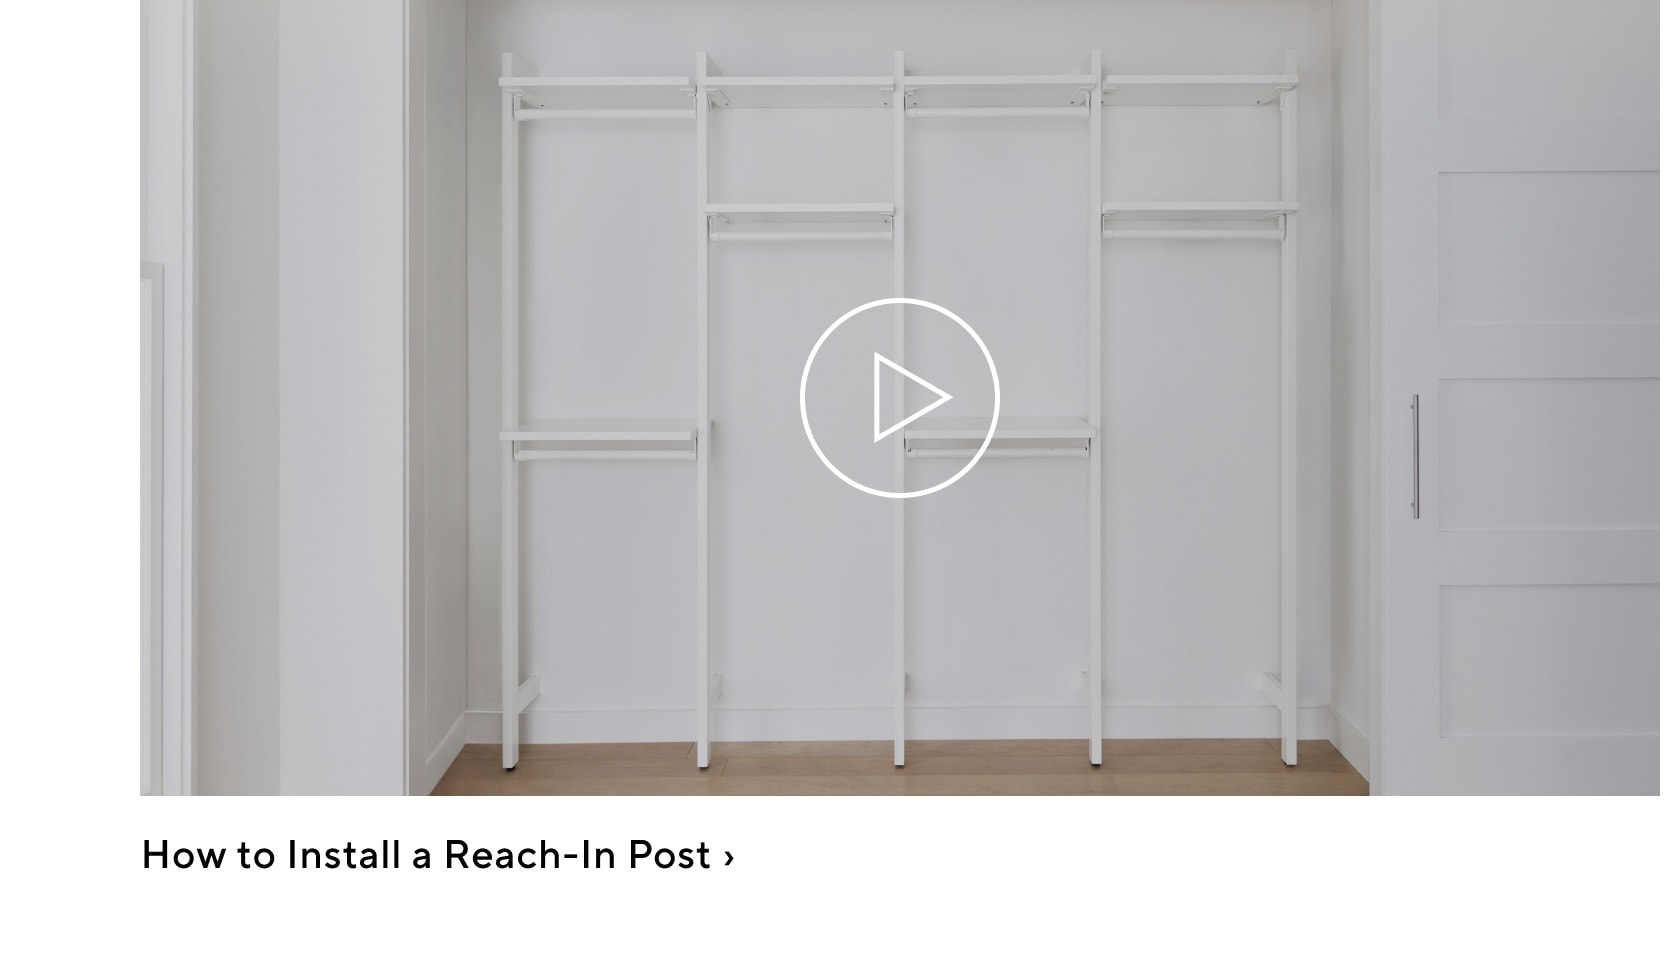 How to Install a Reach-In Post